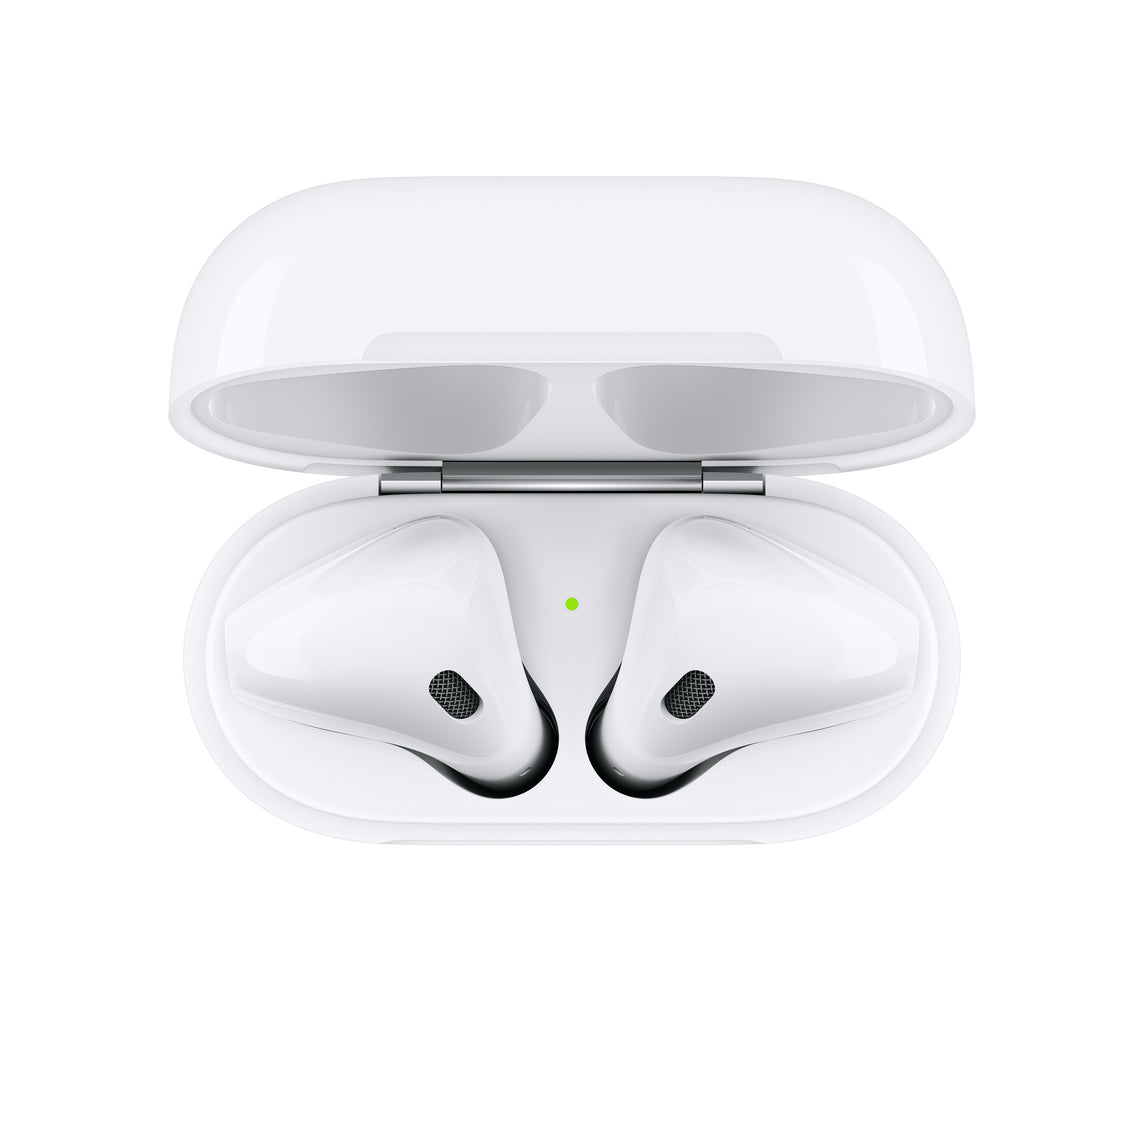 Apple AirPods  2 Generation Brand New